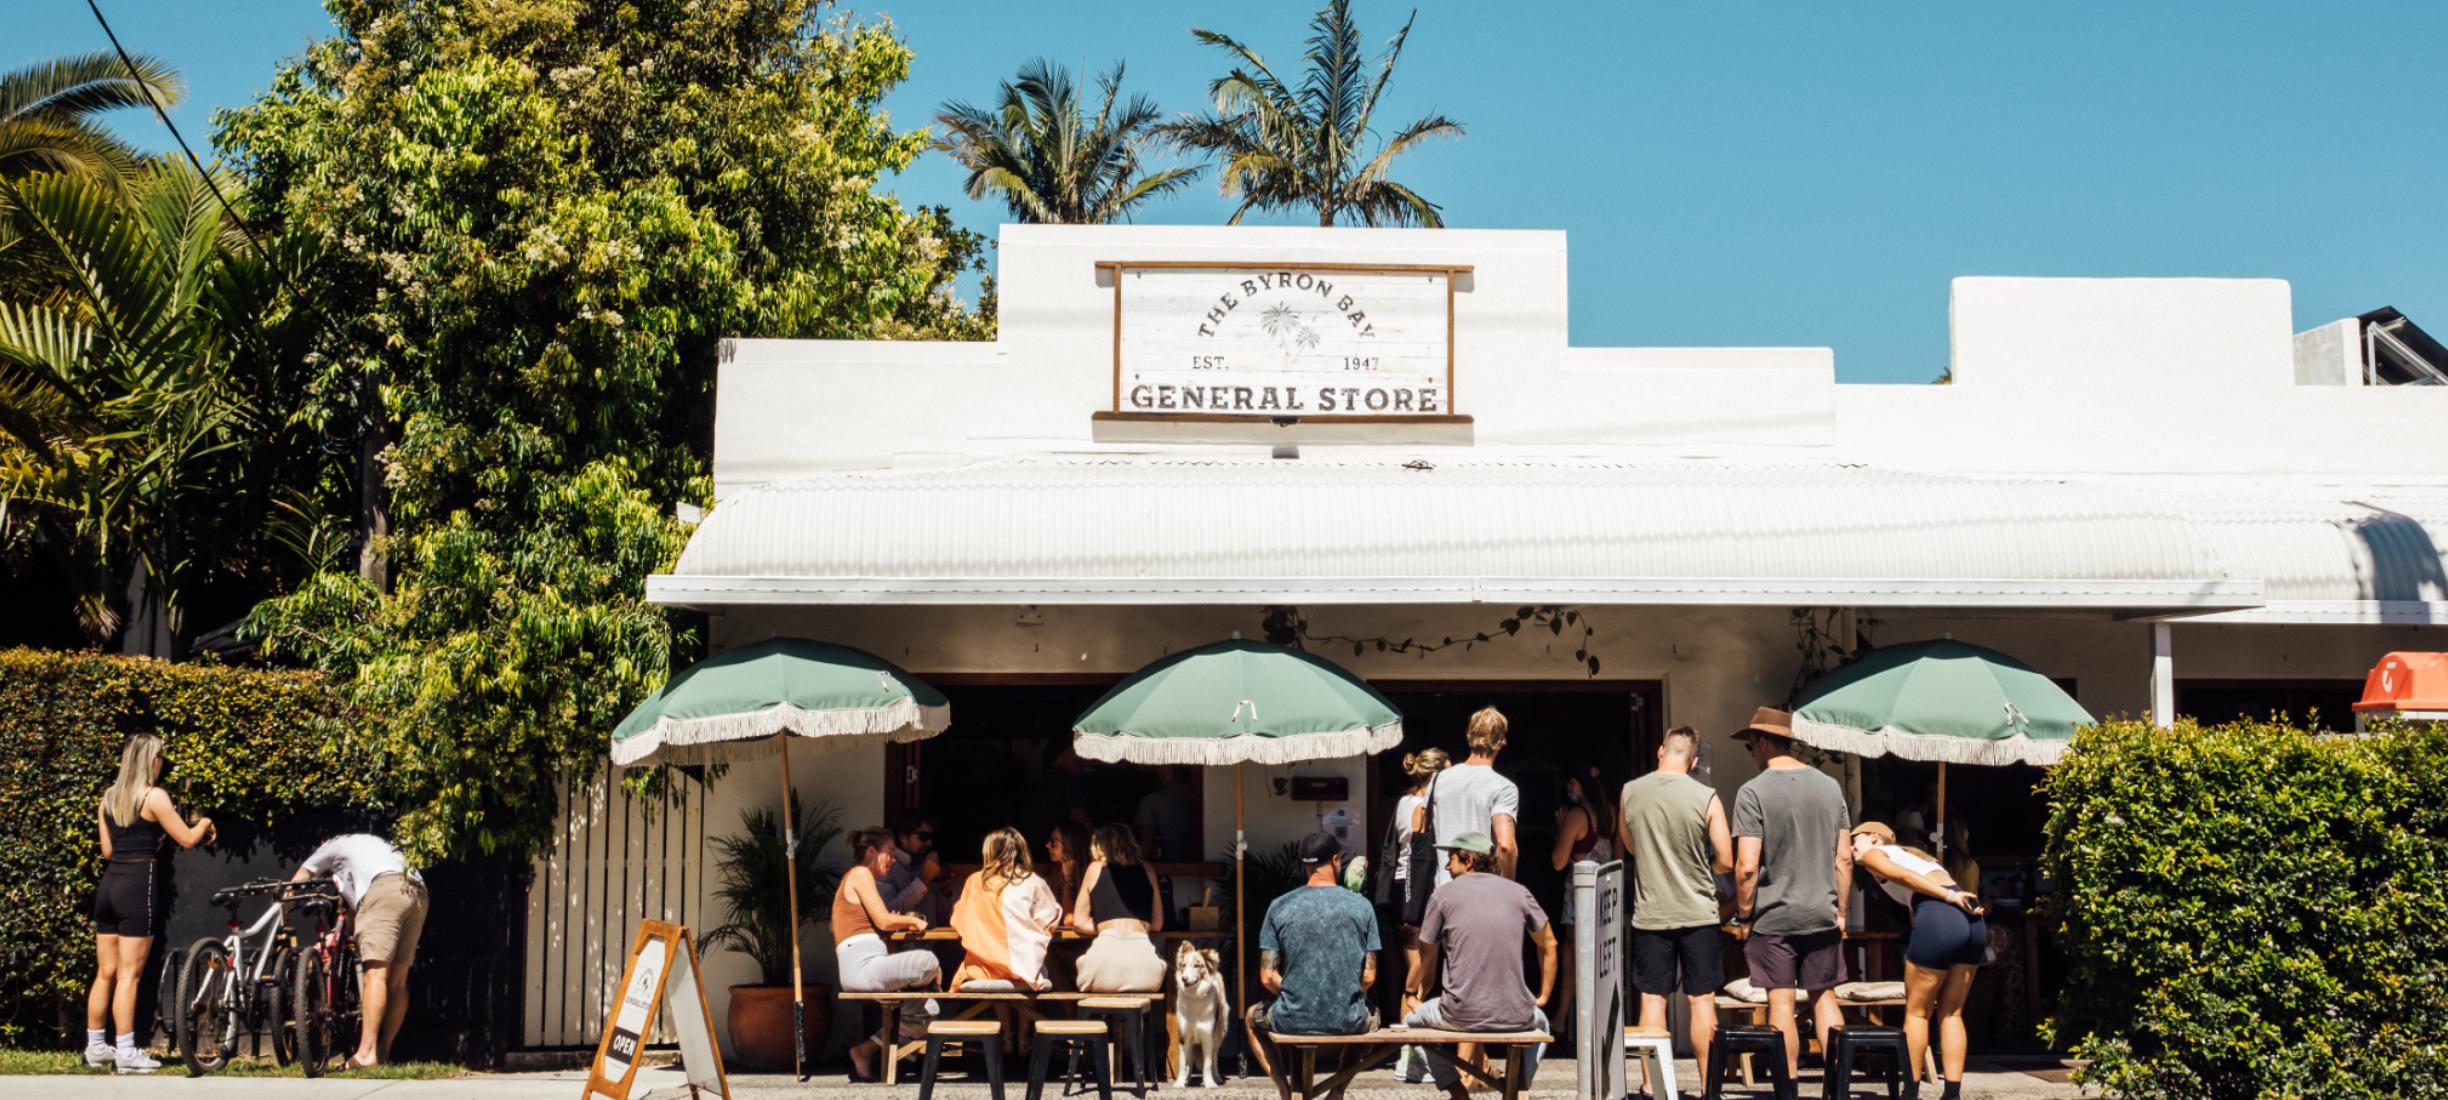 BYRON BAY: What To Pack For A Summer Escape - The Bower Byron Bay